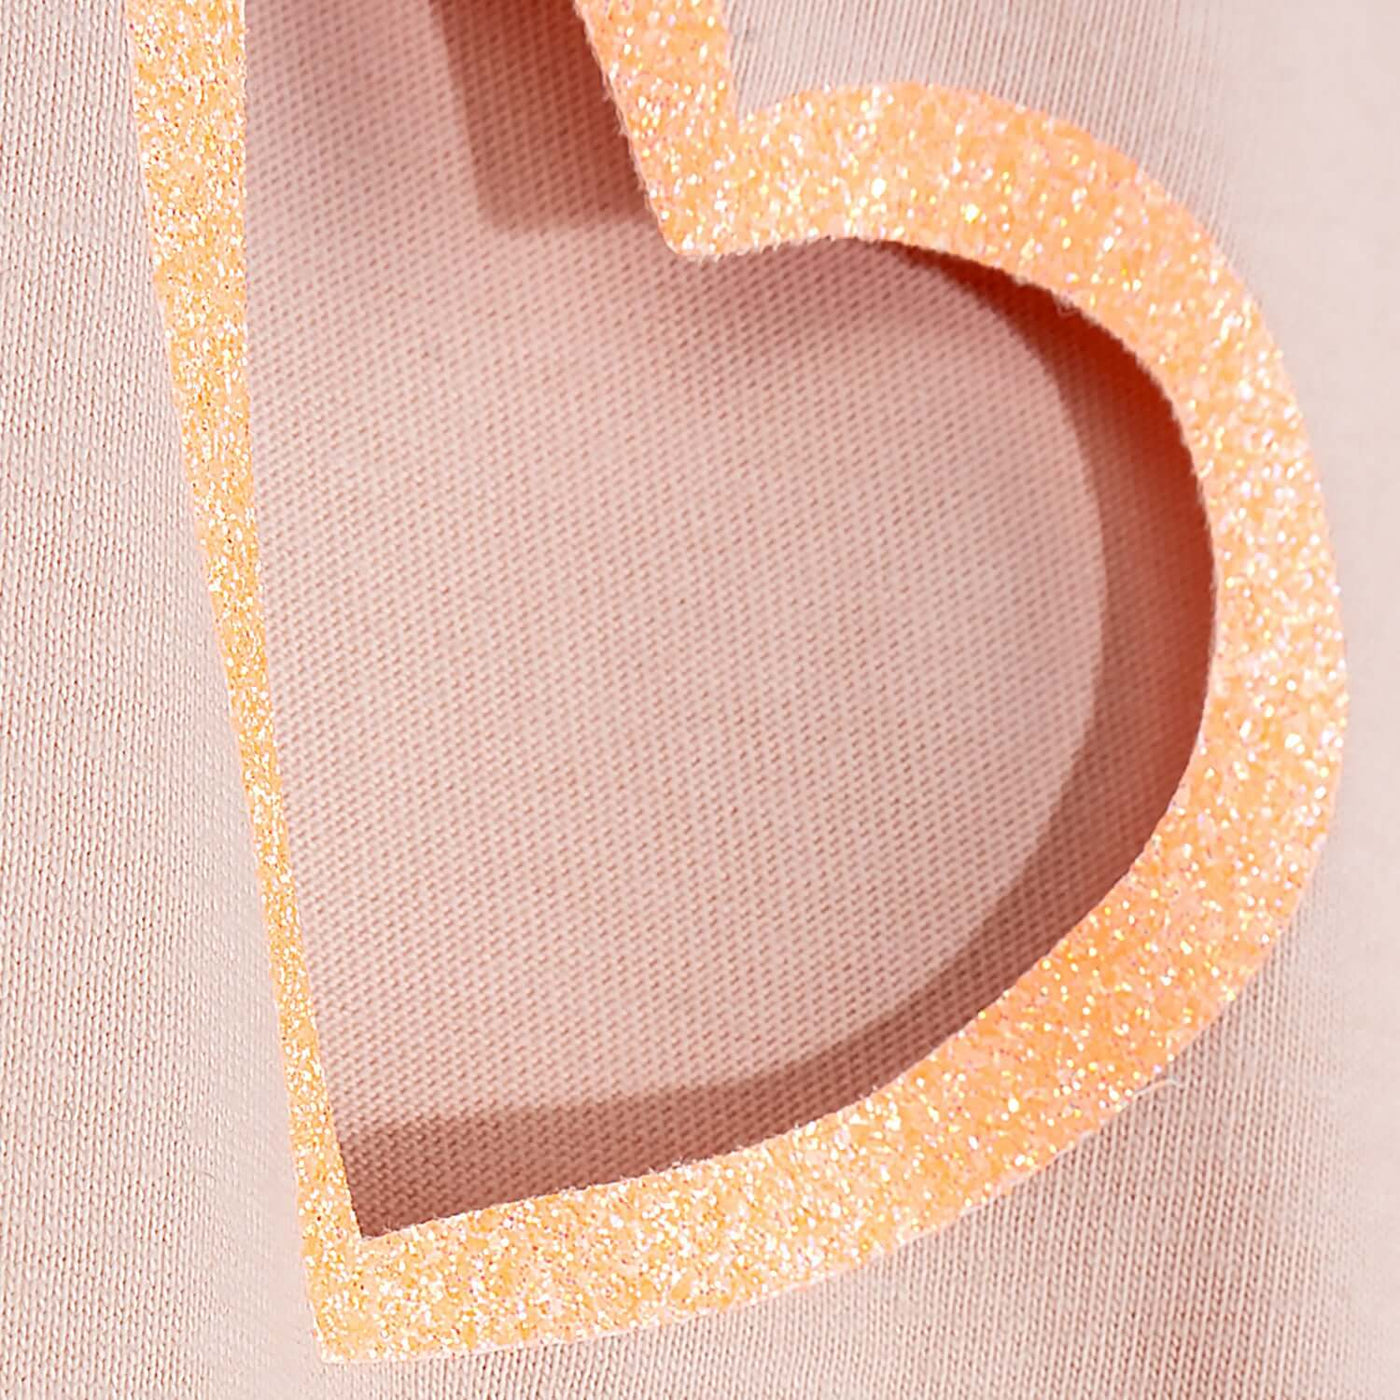 Oversize Tee "Flying Hearts" - peach (Detail)